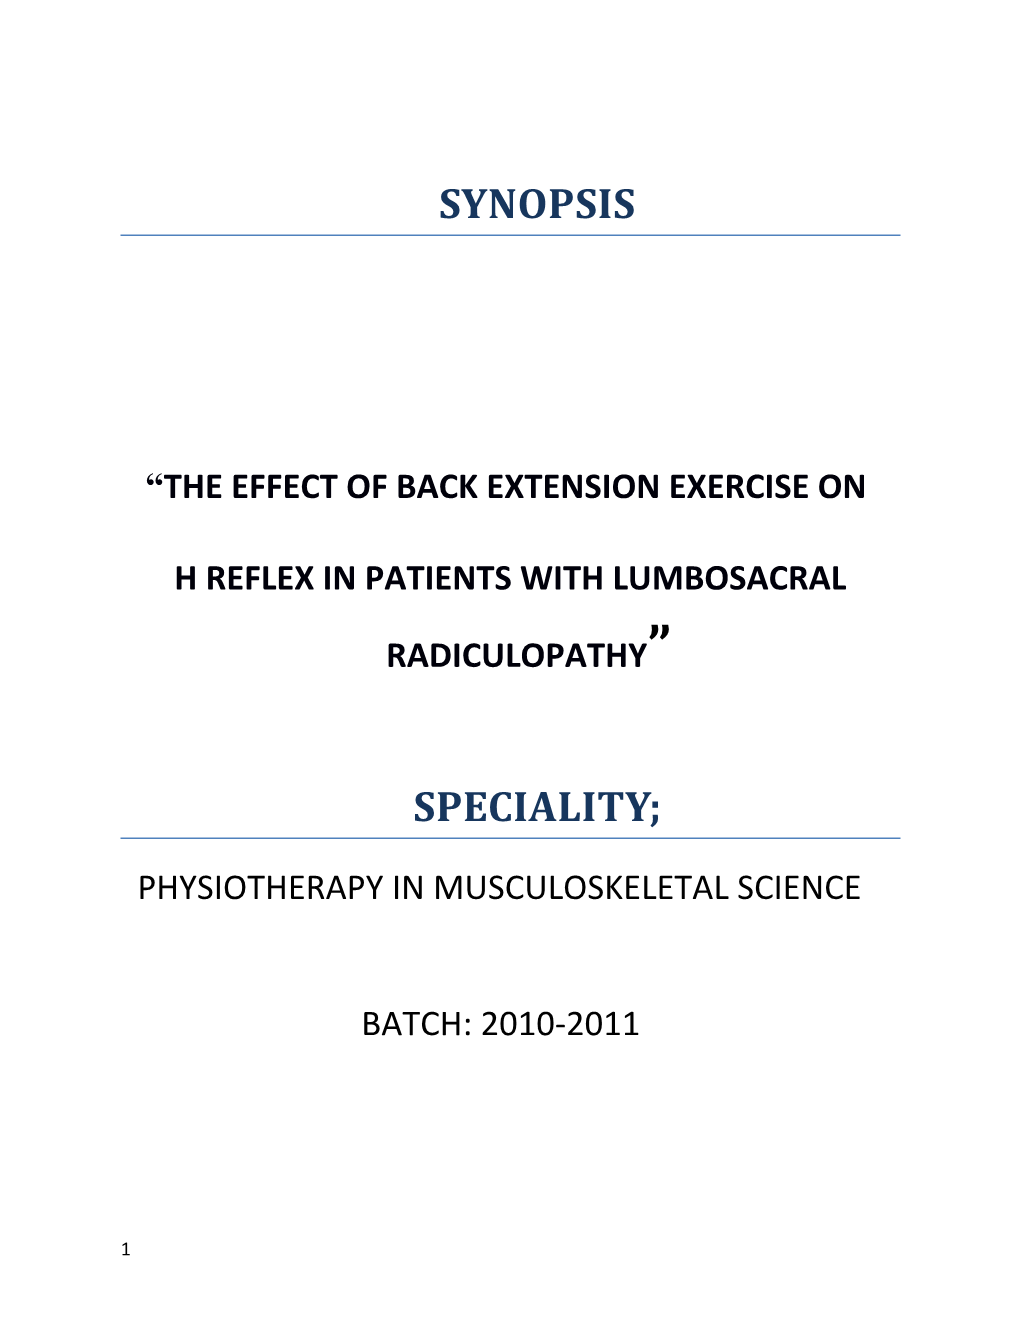 The Effect of Back Extension Exercise On